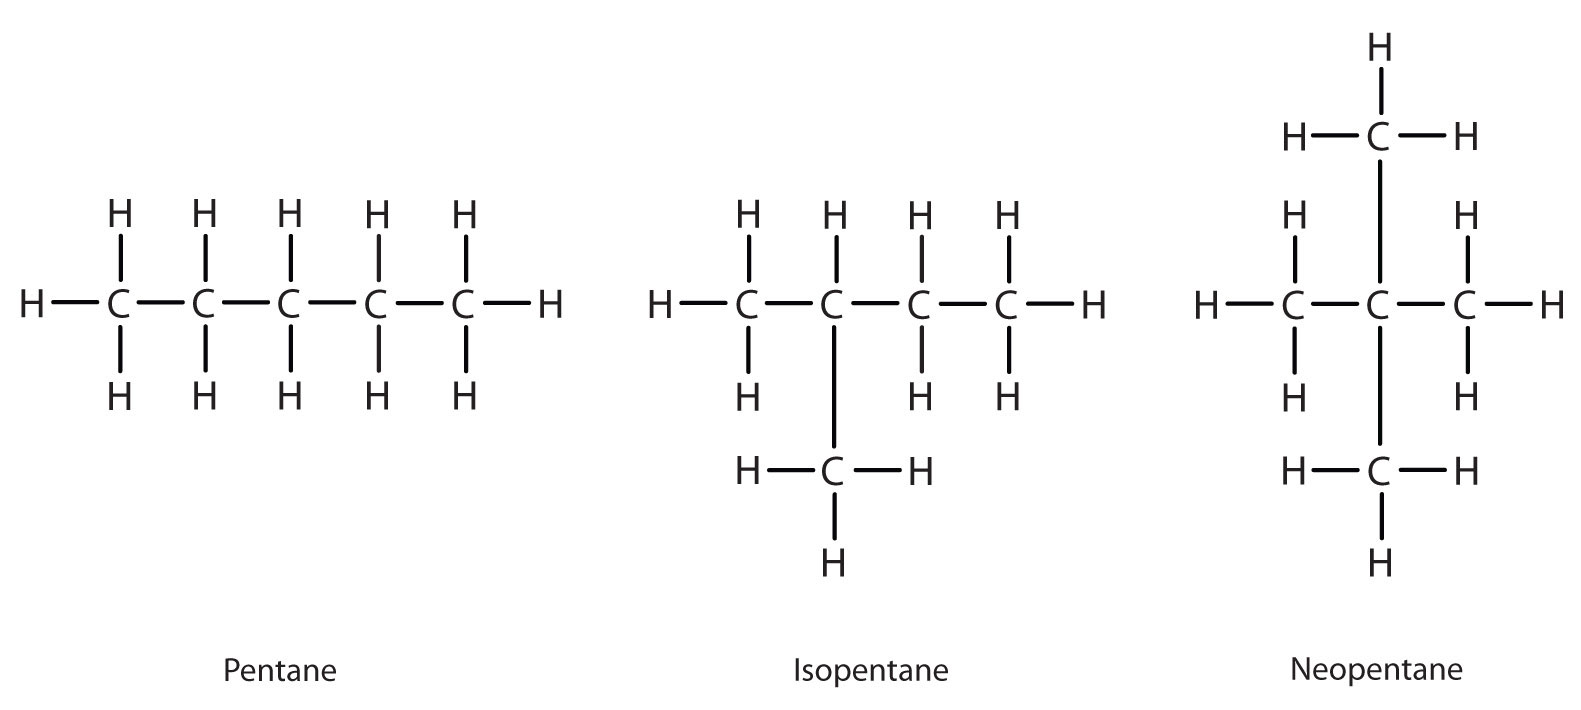 Structural formulas representing 3 isomers of pentane. From the left side there is pentane, isopentane and neopetane (right)